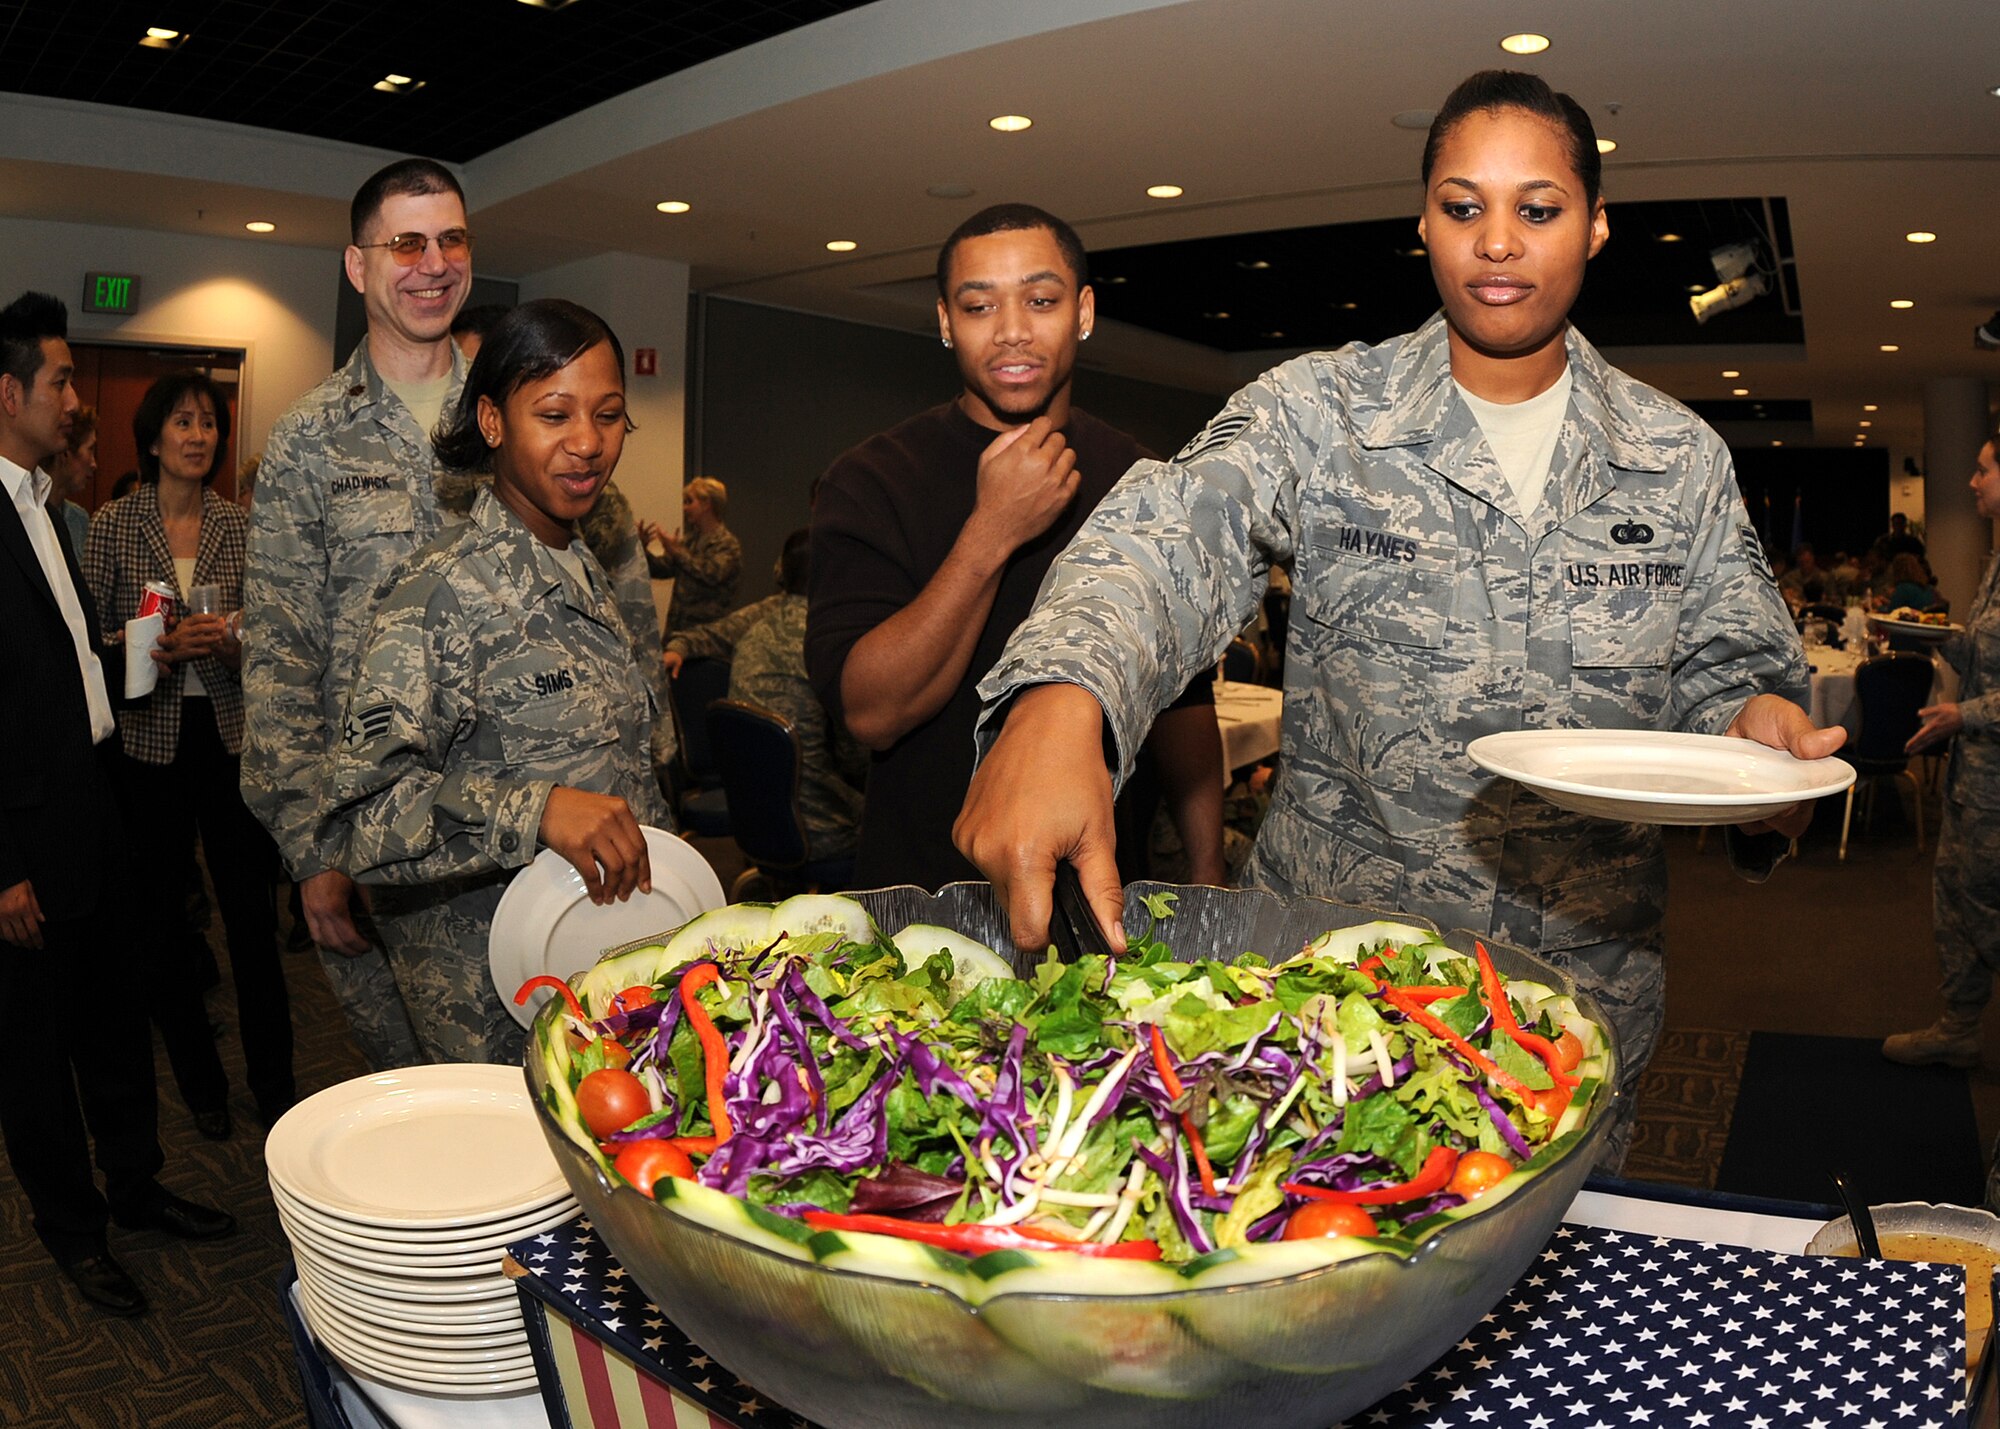 Staff Sgt. Meegan Haynes, 61st Communications Squadron, who recently returned from a deployment from Qatar in the Middle East, helps herself to some salad at a luncheon held after the "SMC Welcome Home Airmen Celebration" at the Gordon Conference Center, Jan. 29. (Photo by Stephen Schester)